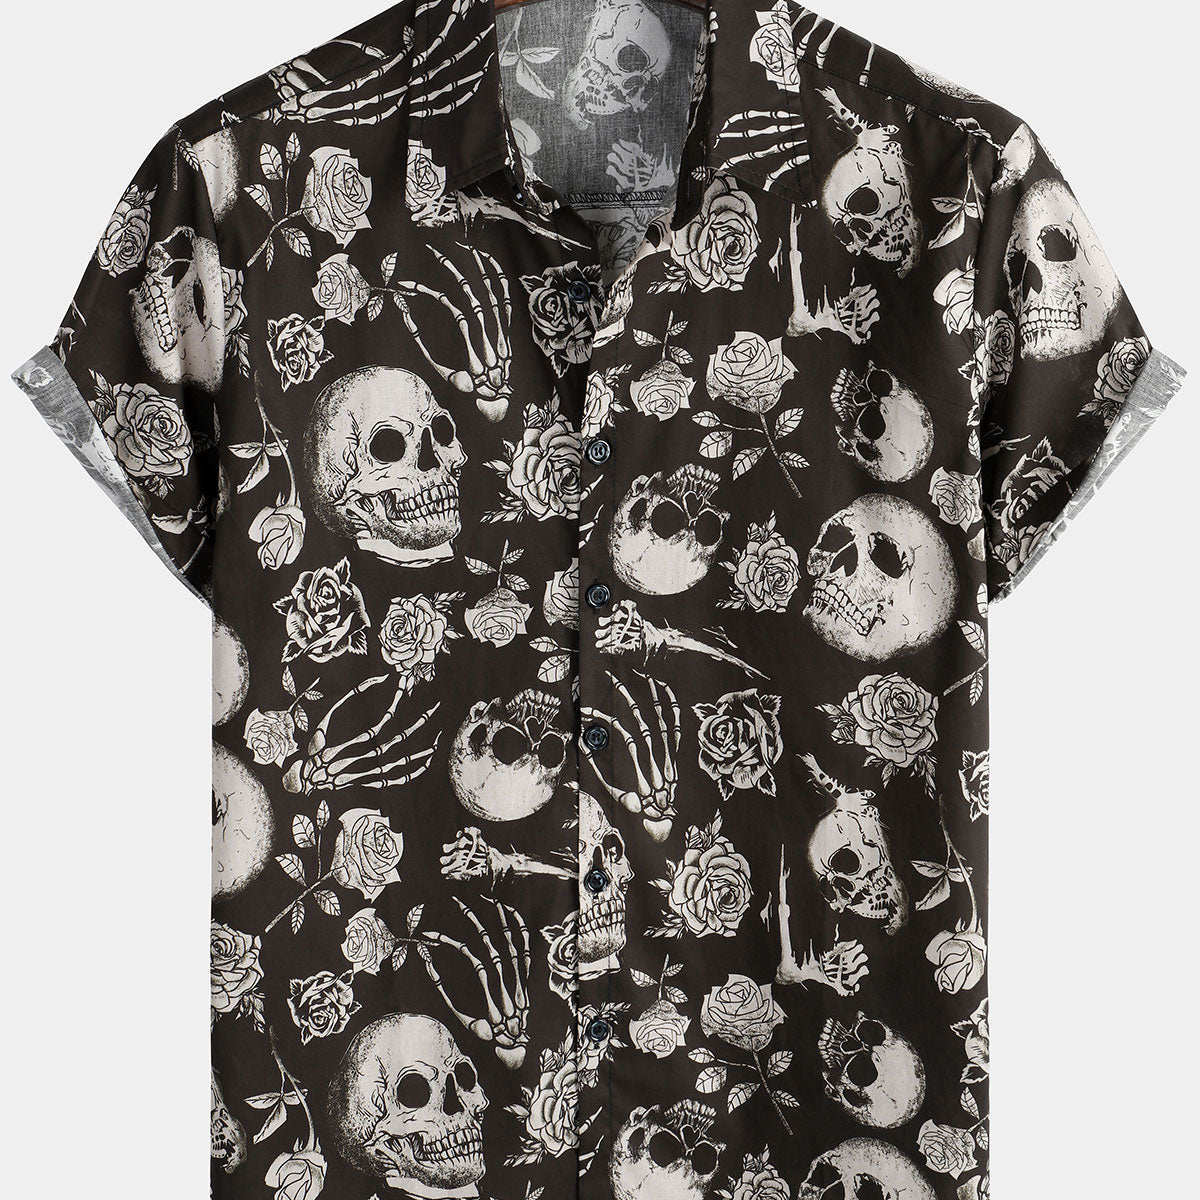 Men's Skull Rose Floral Punk Rock and Roll Cool Button Up Shirt